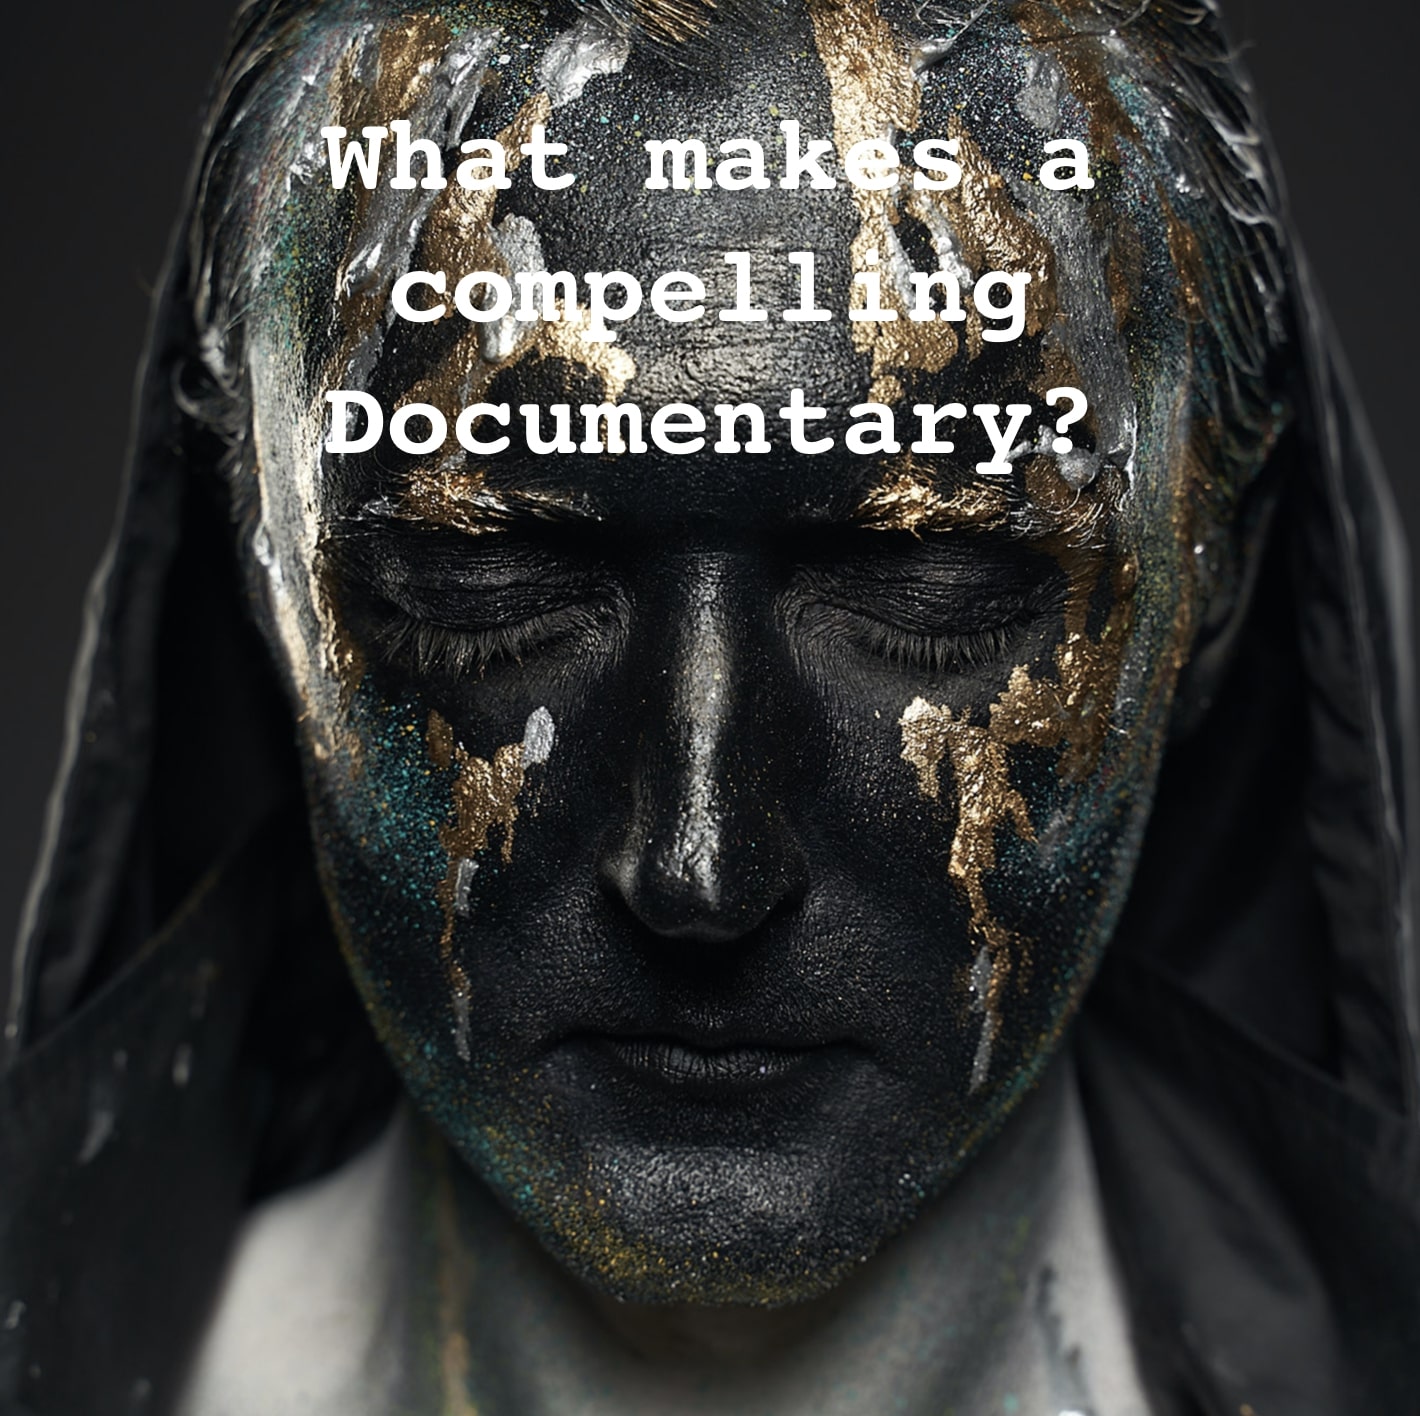 WHAT DO YOU THINK makes a compelling documentary?